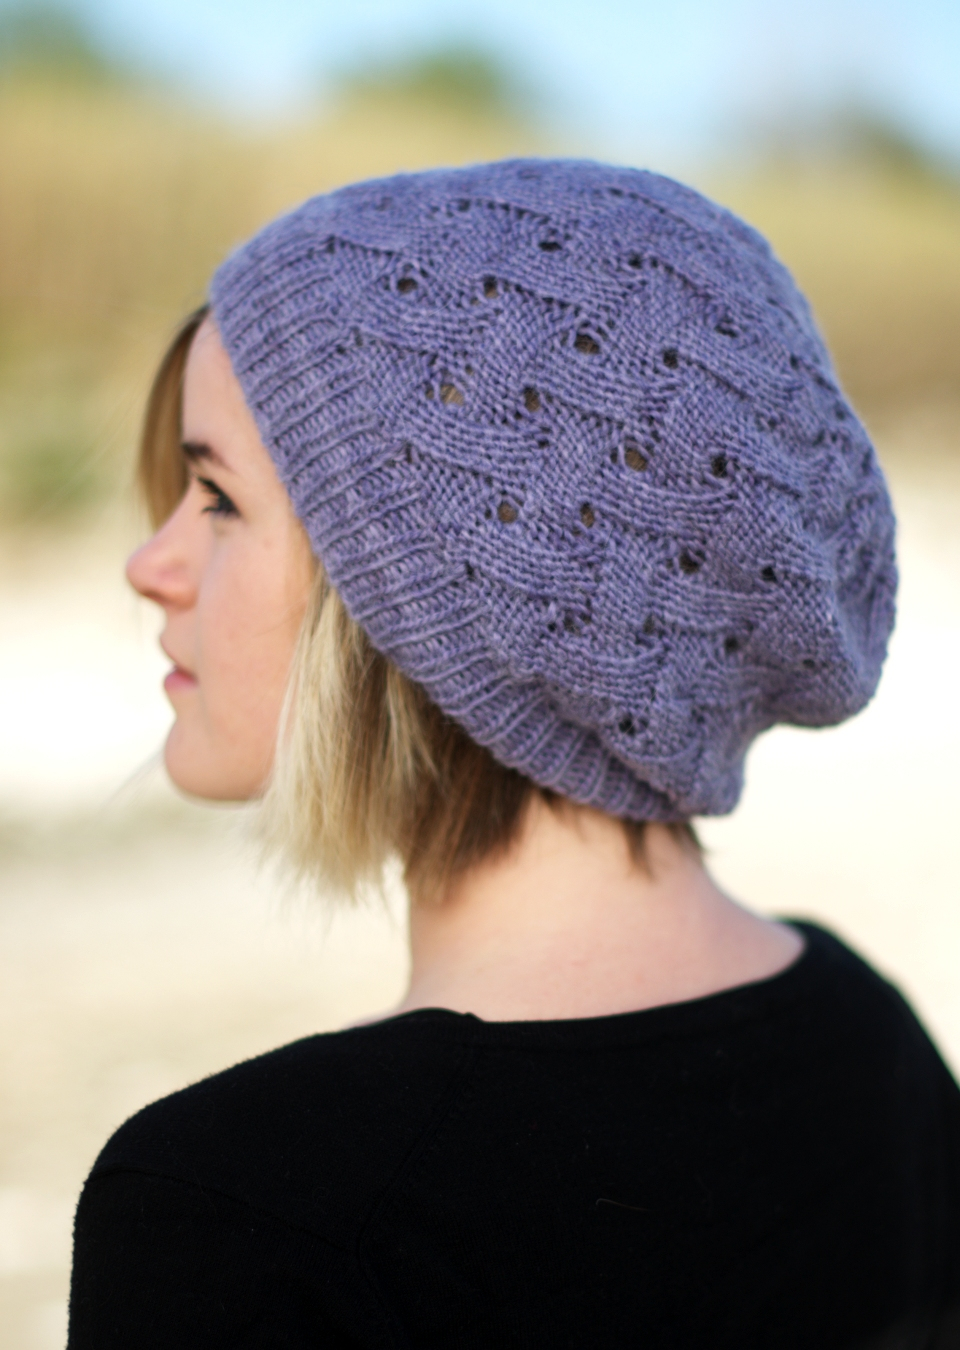 Hat Knitting Patterns Various Knitting Patterns The Best One Knitting Patterns For Hats